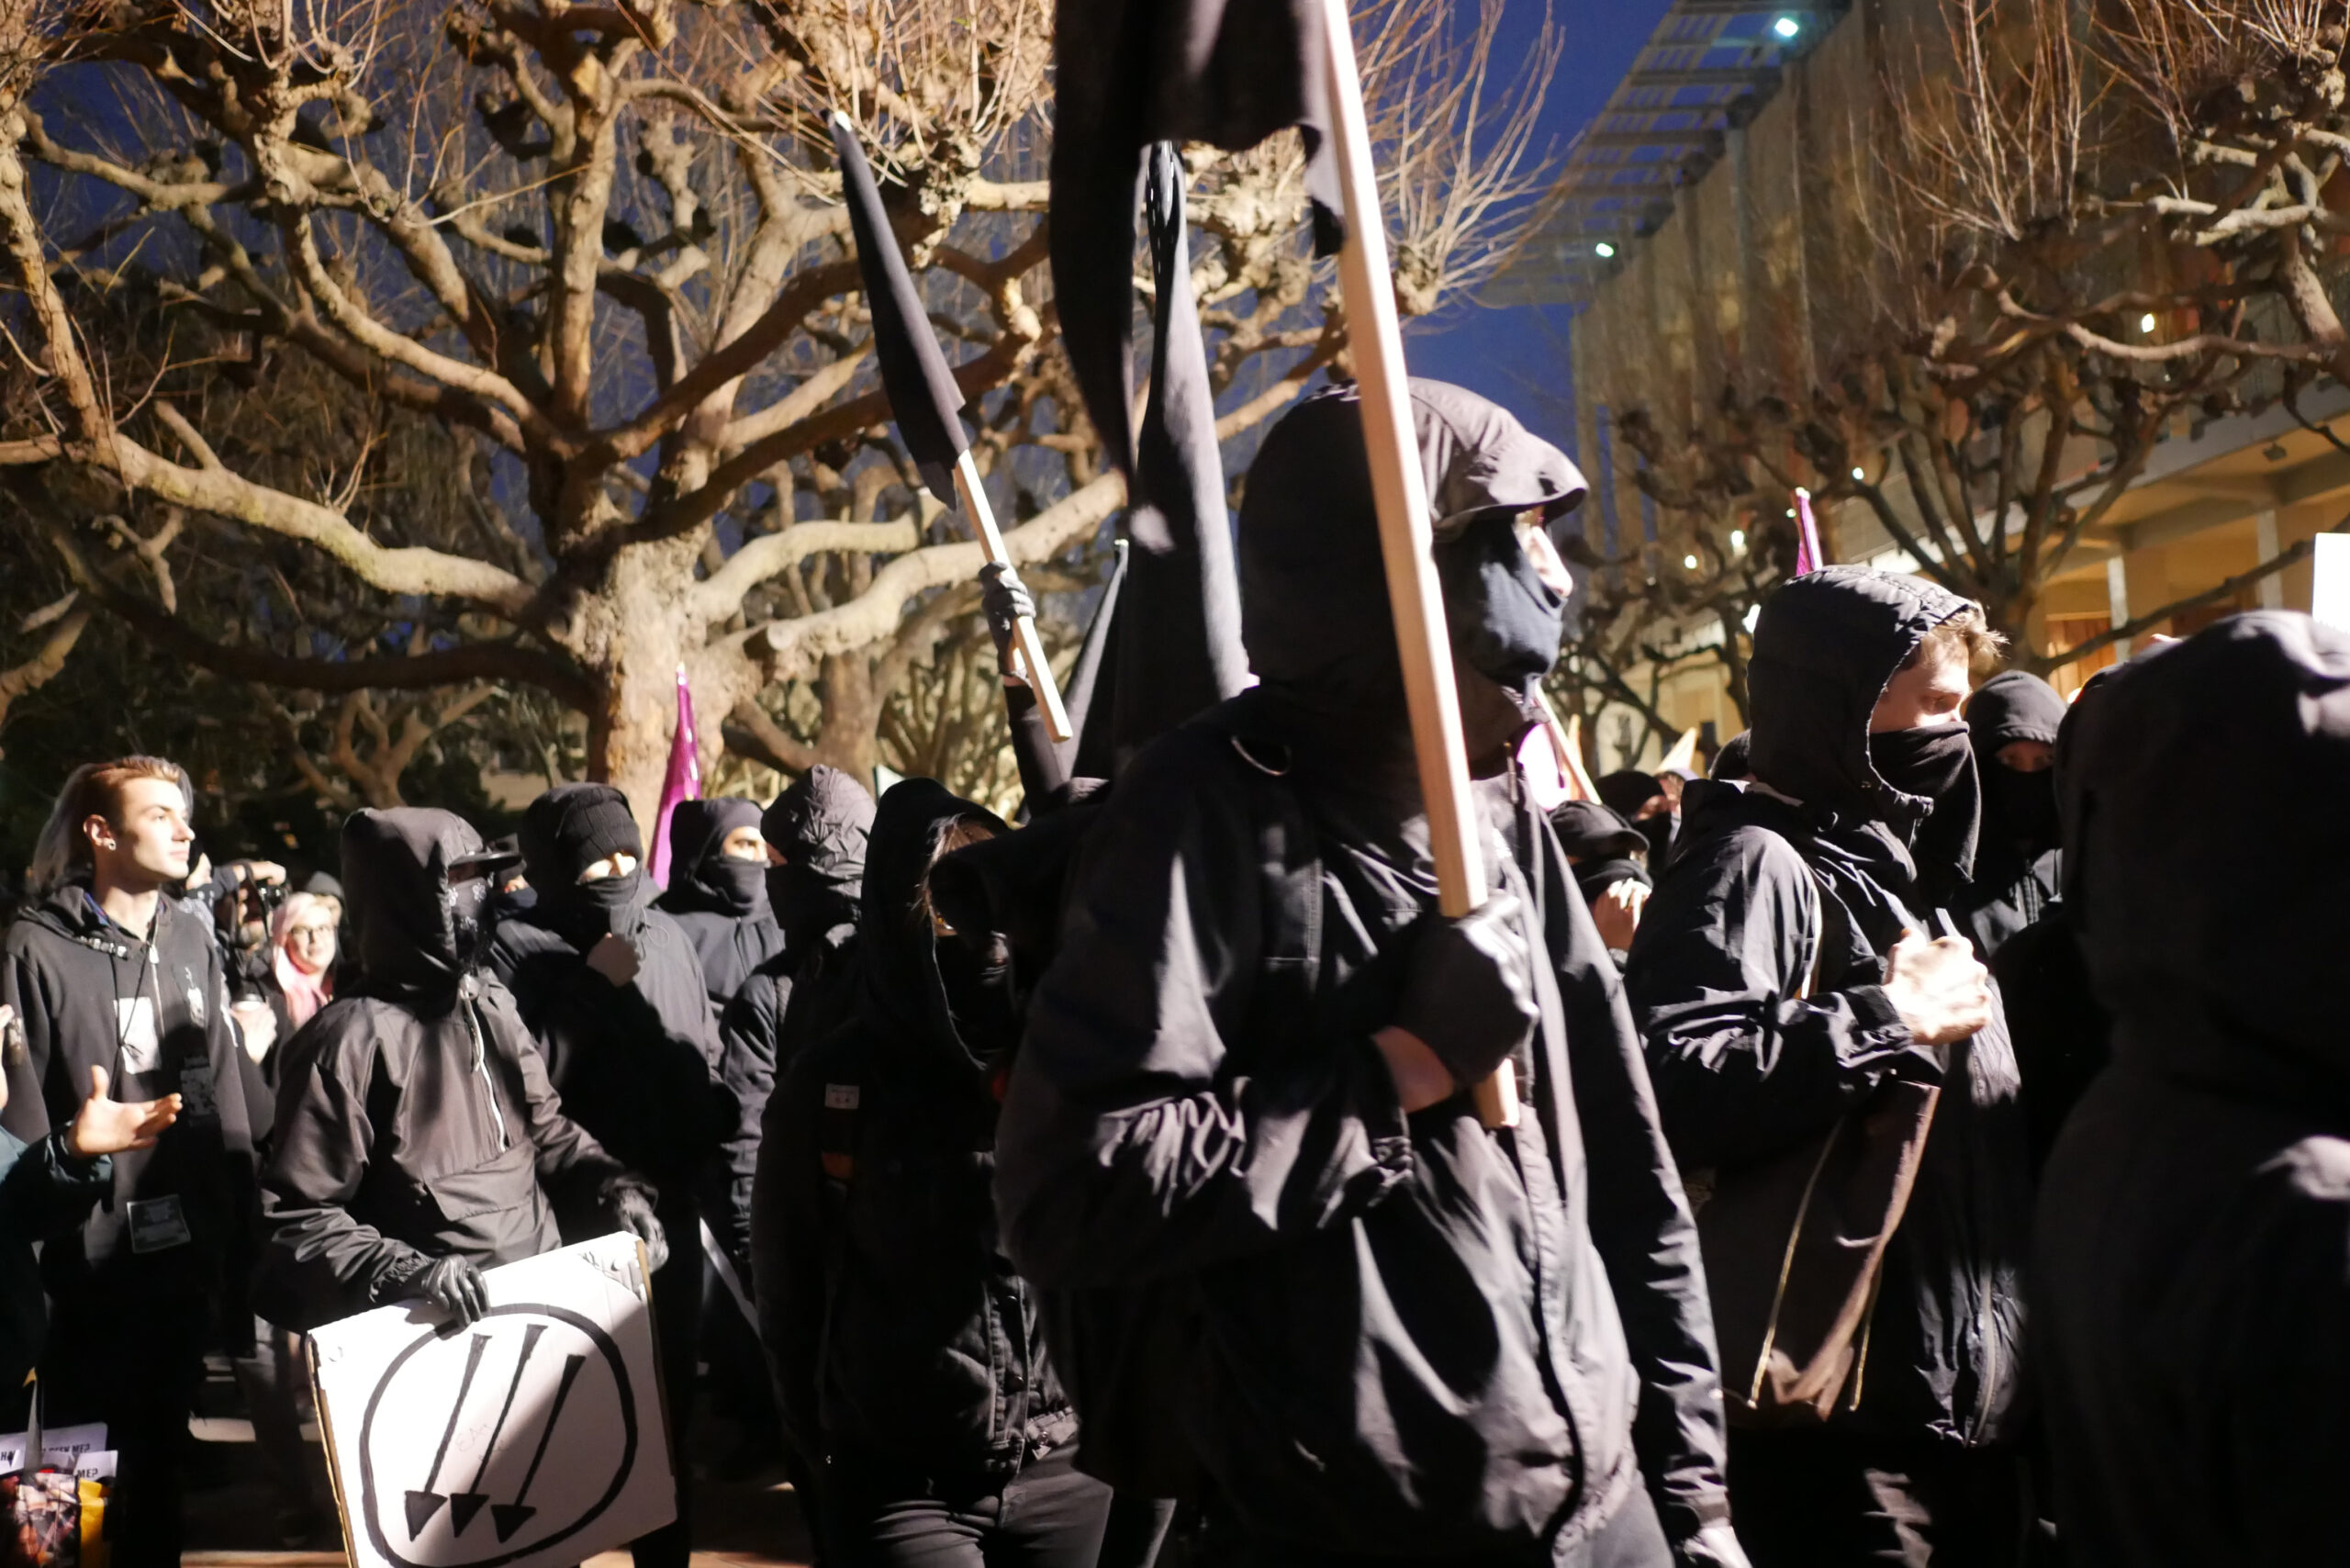 A group of protesters were hooded jackets and cloth masks, carrying a black flag.